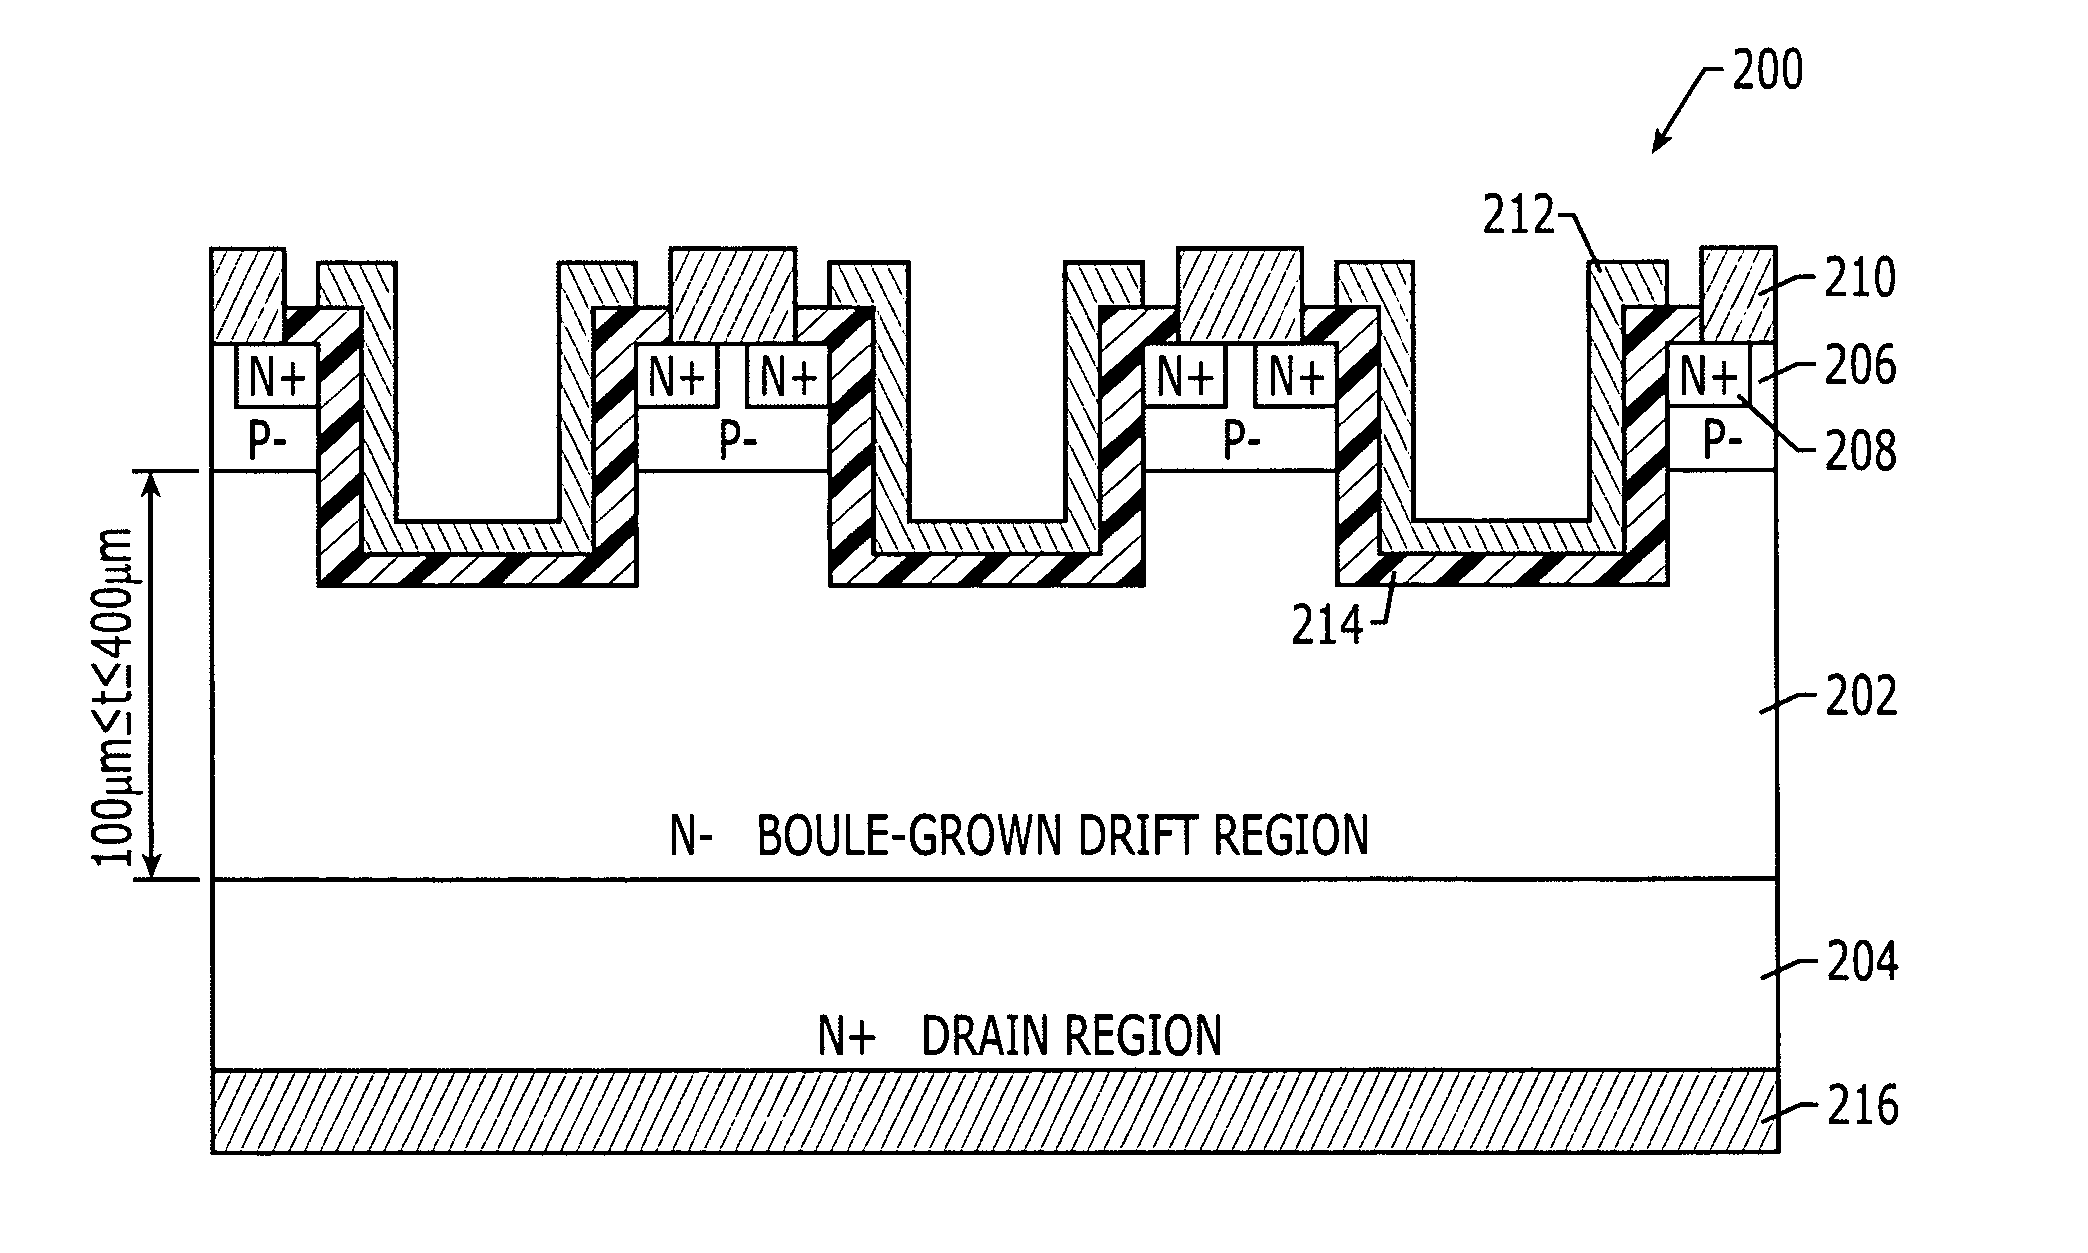 Methods of forming power semiconductor devices using boule-grown silicon carbide drift layers and power semiconductor devices formed thereby